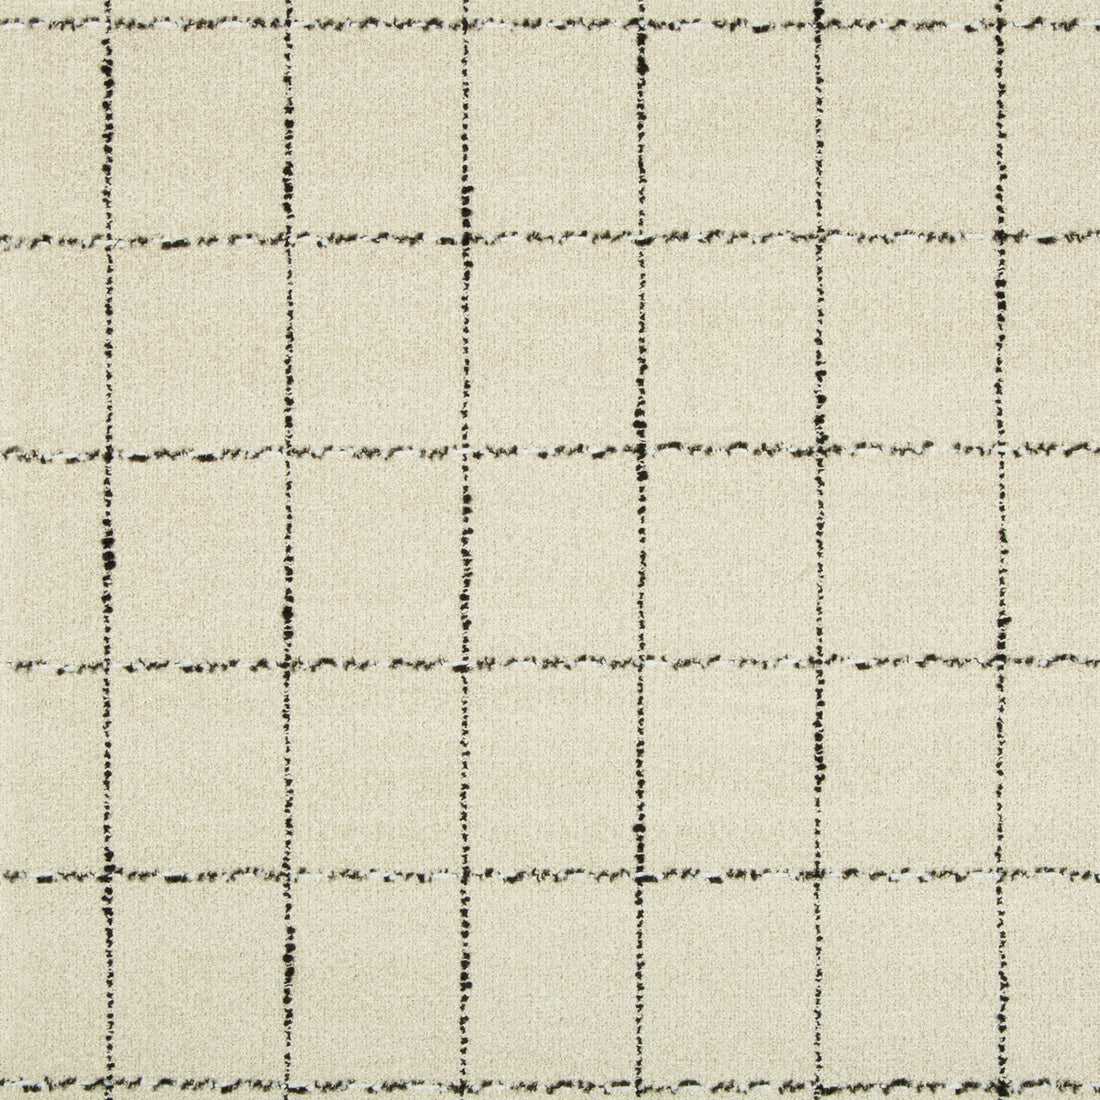 Pocket Square fabric in stone color - pattern 34906.16.0 - by Kravet Couture in the Modern Tailor collection